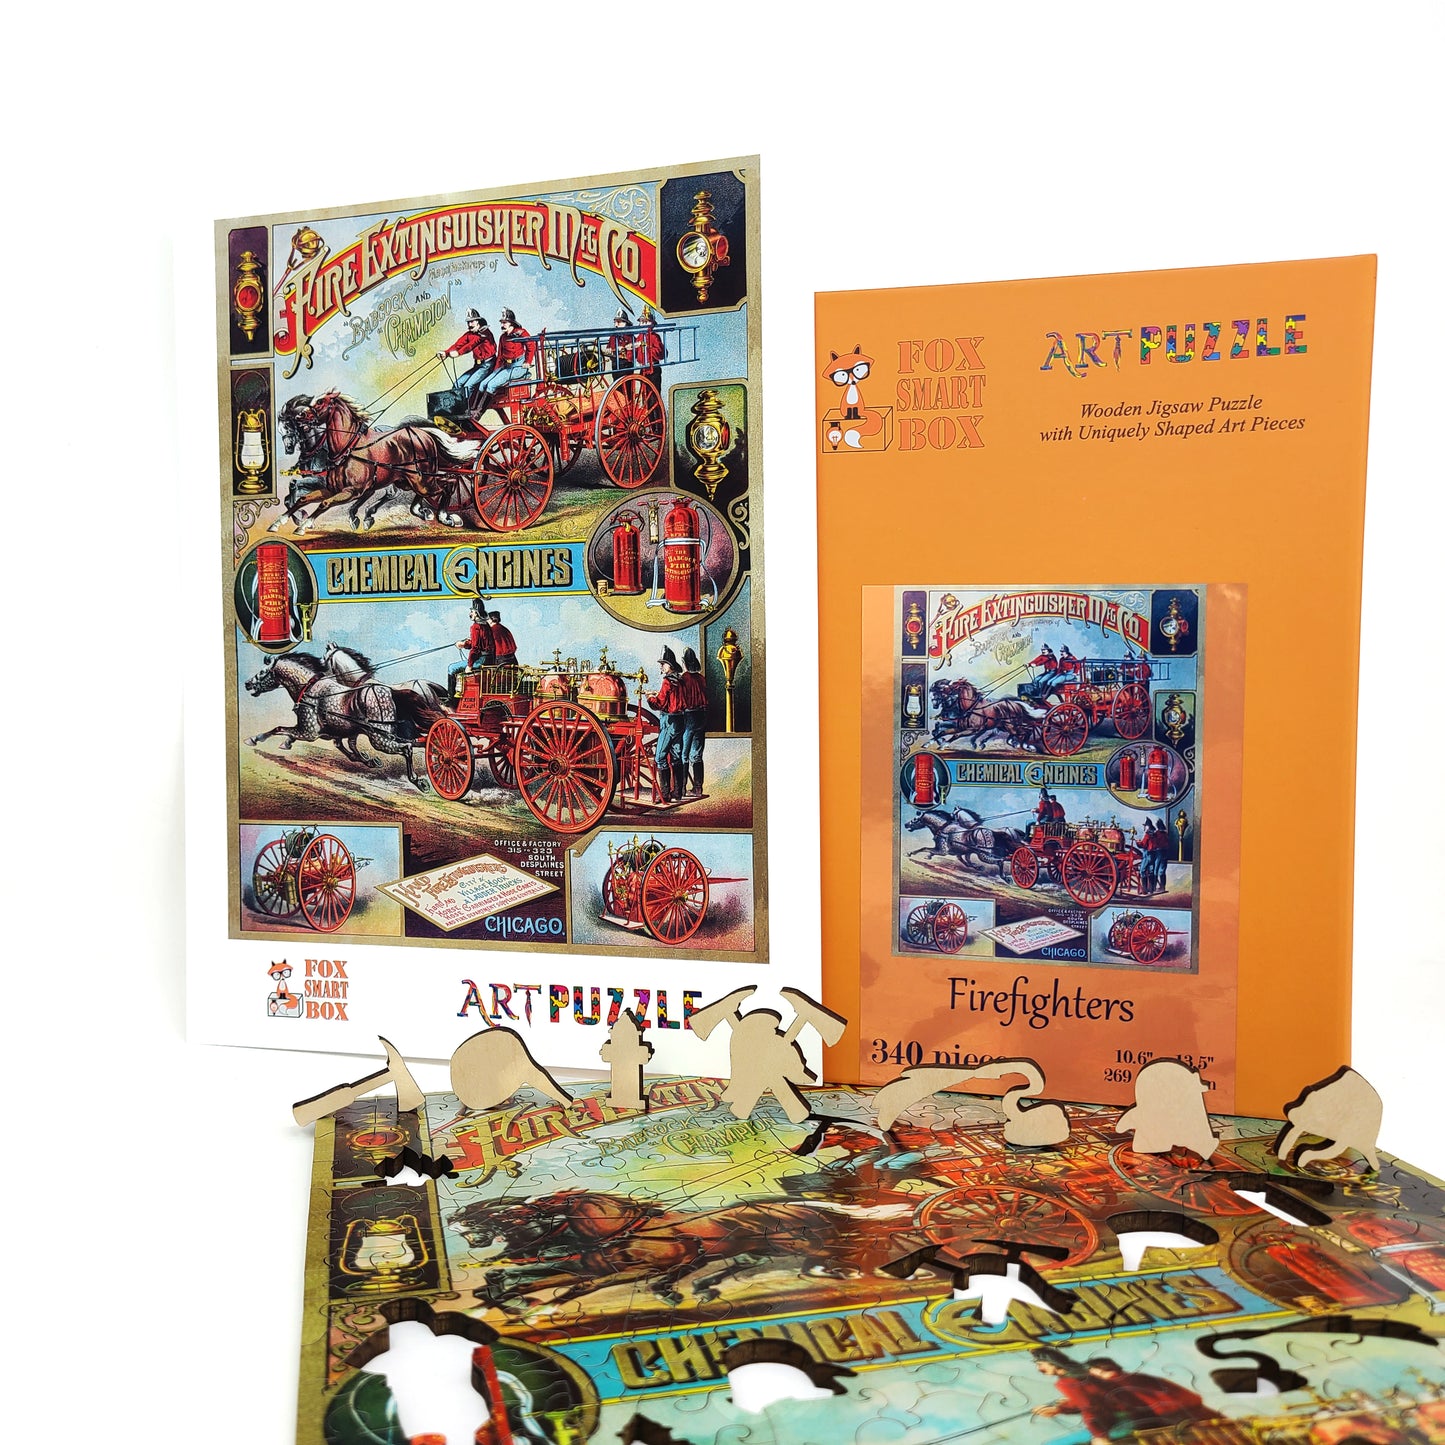 Wooden Jigsaw Puzzle with Uniquely Shaped Pieces for Adults - 340 pieces - Firefighters